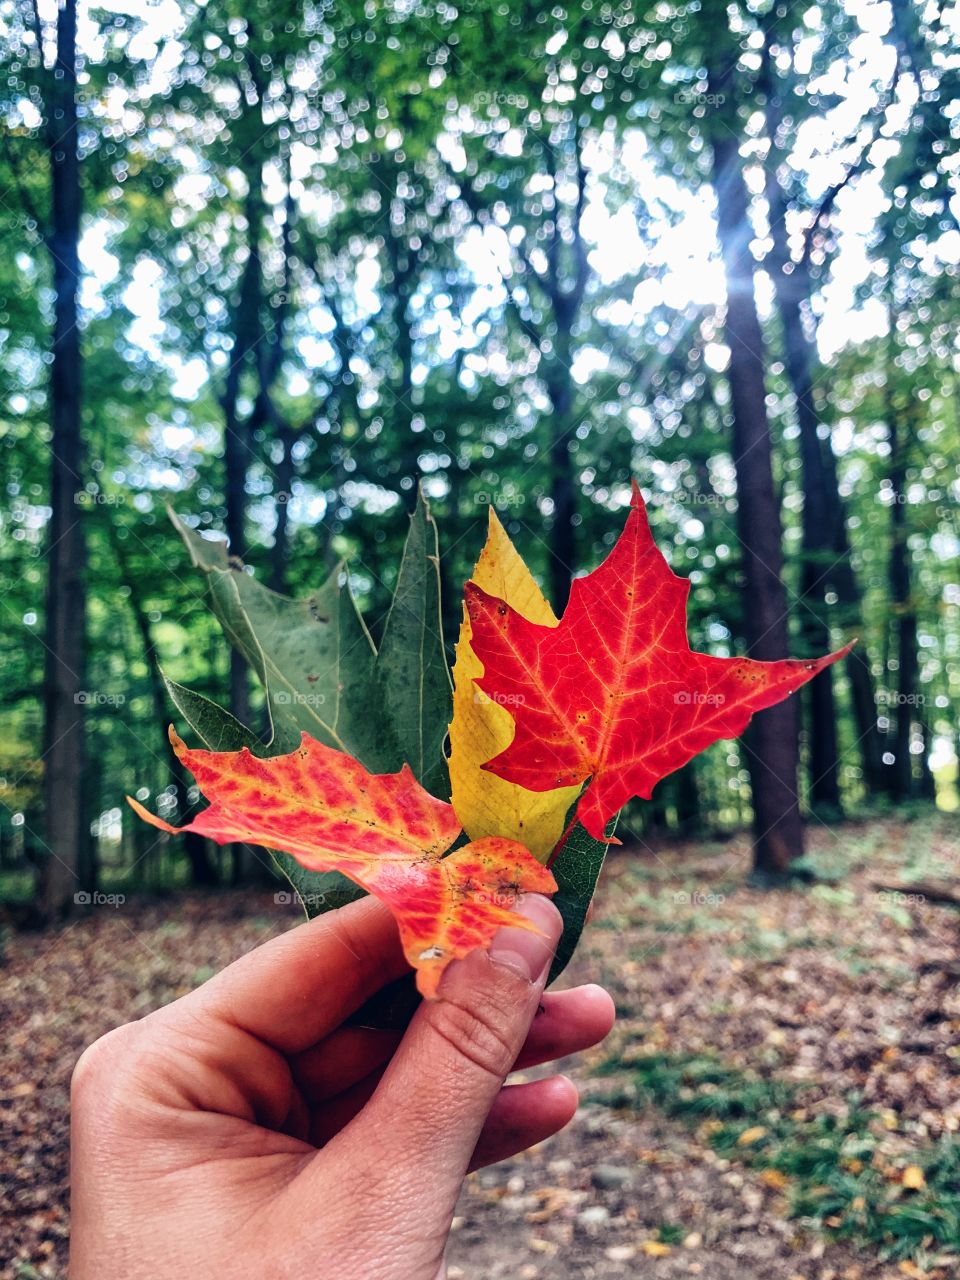 Fall is in the air 